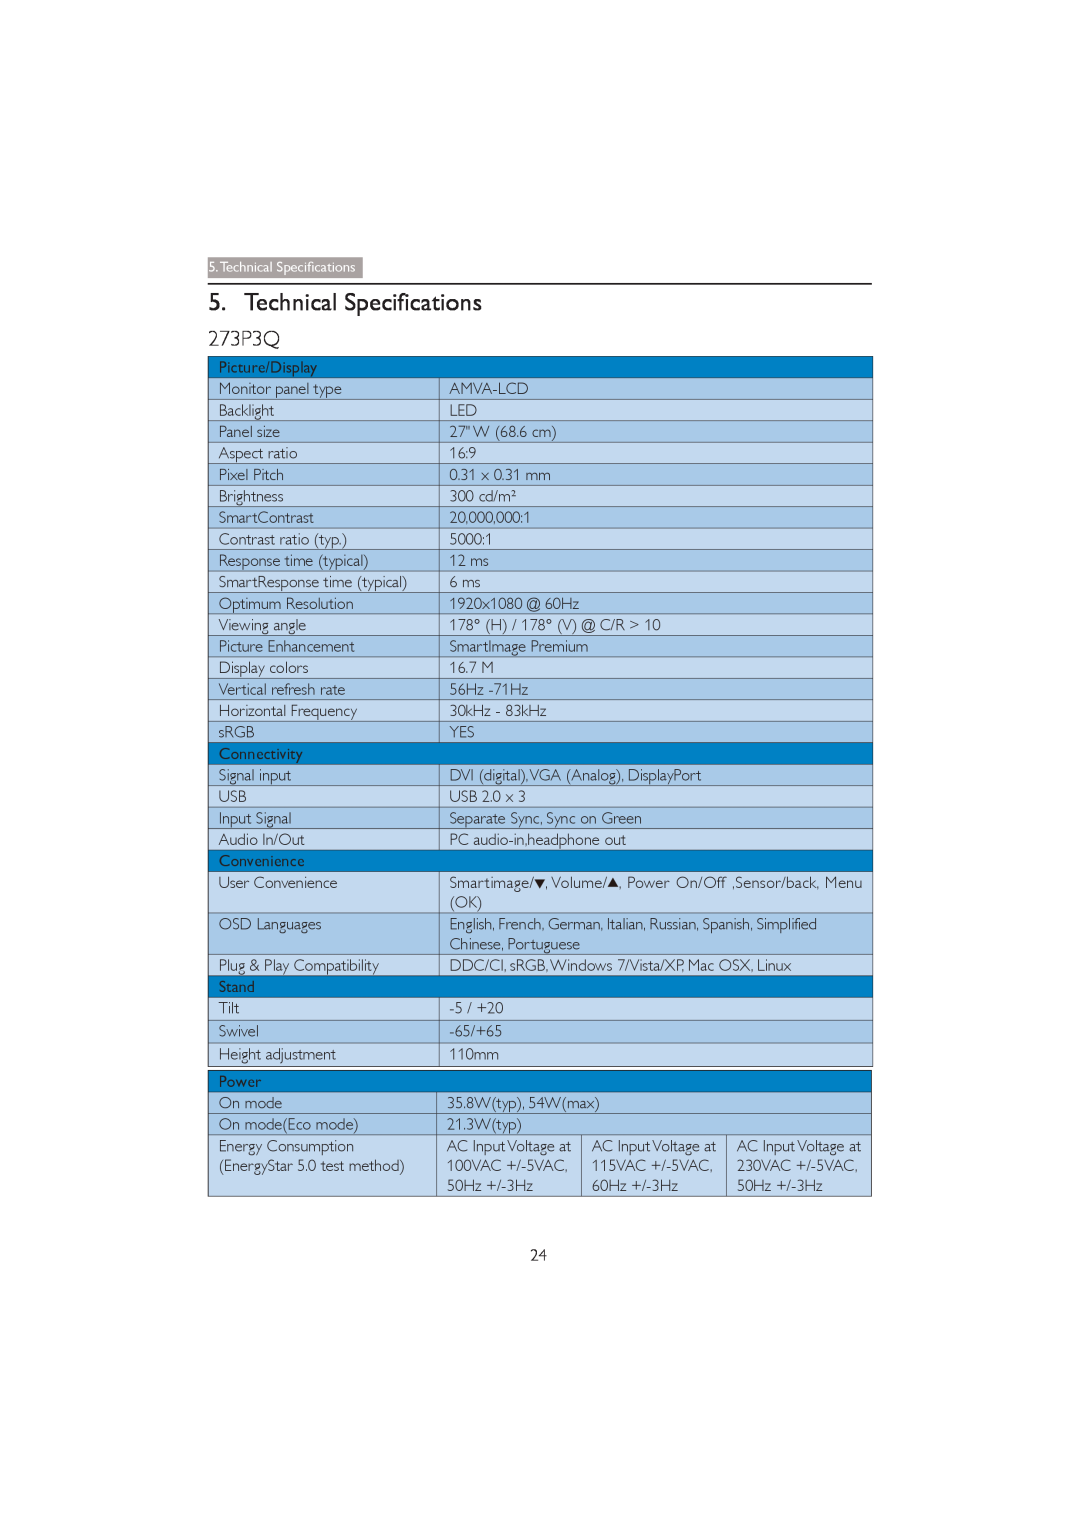 Philips user manual Technical Specifications 273P3Q, Technical Speciﬁcations 